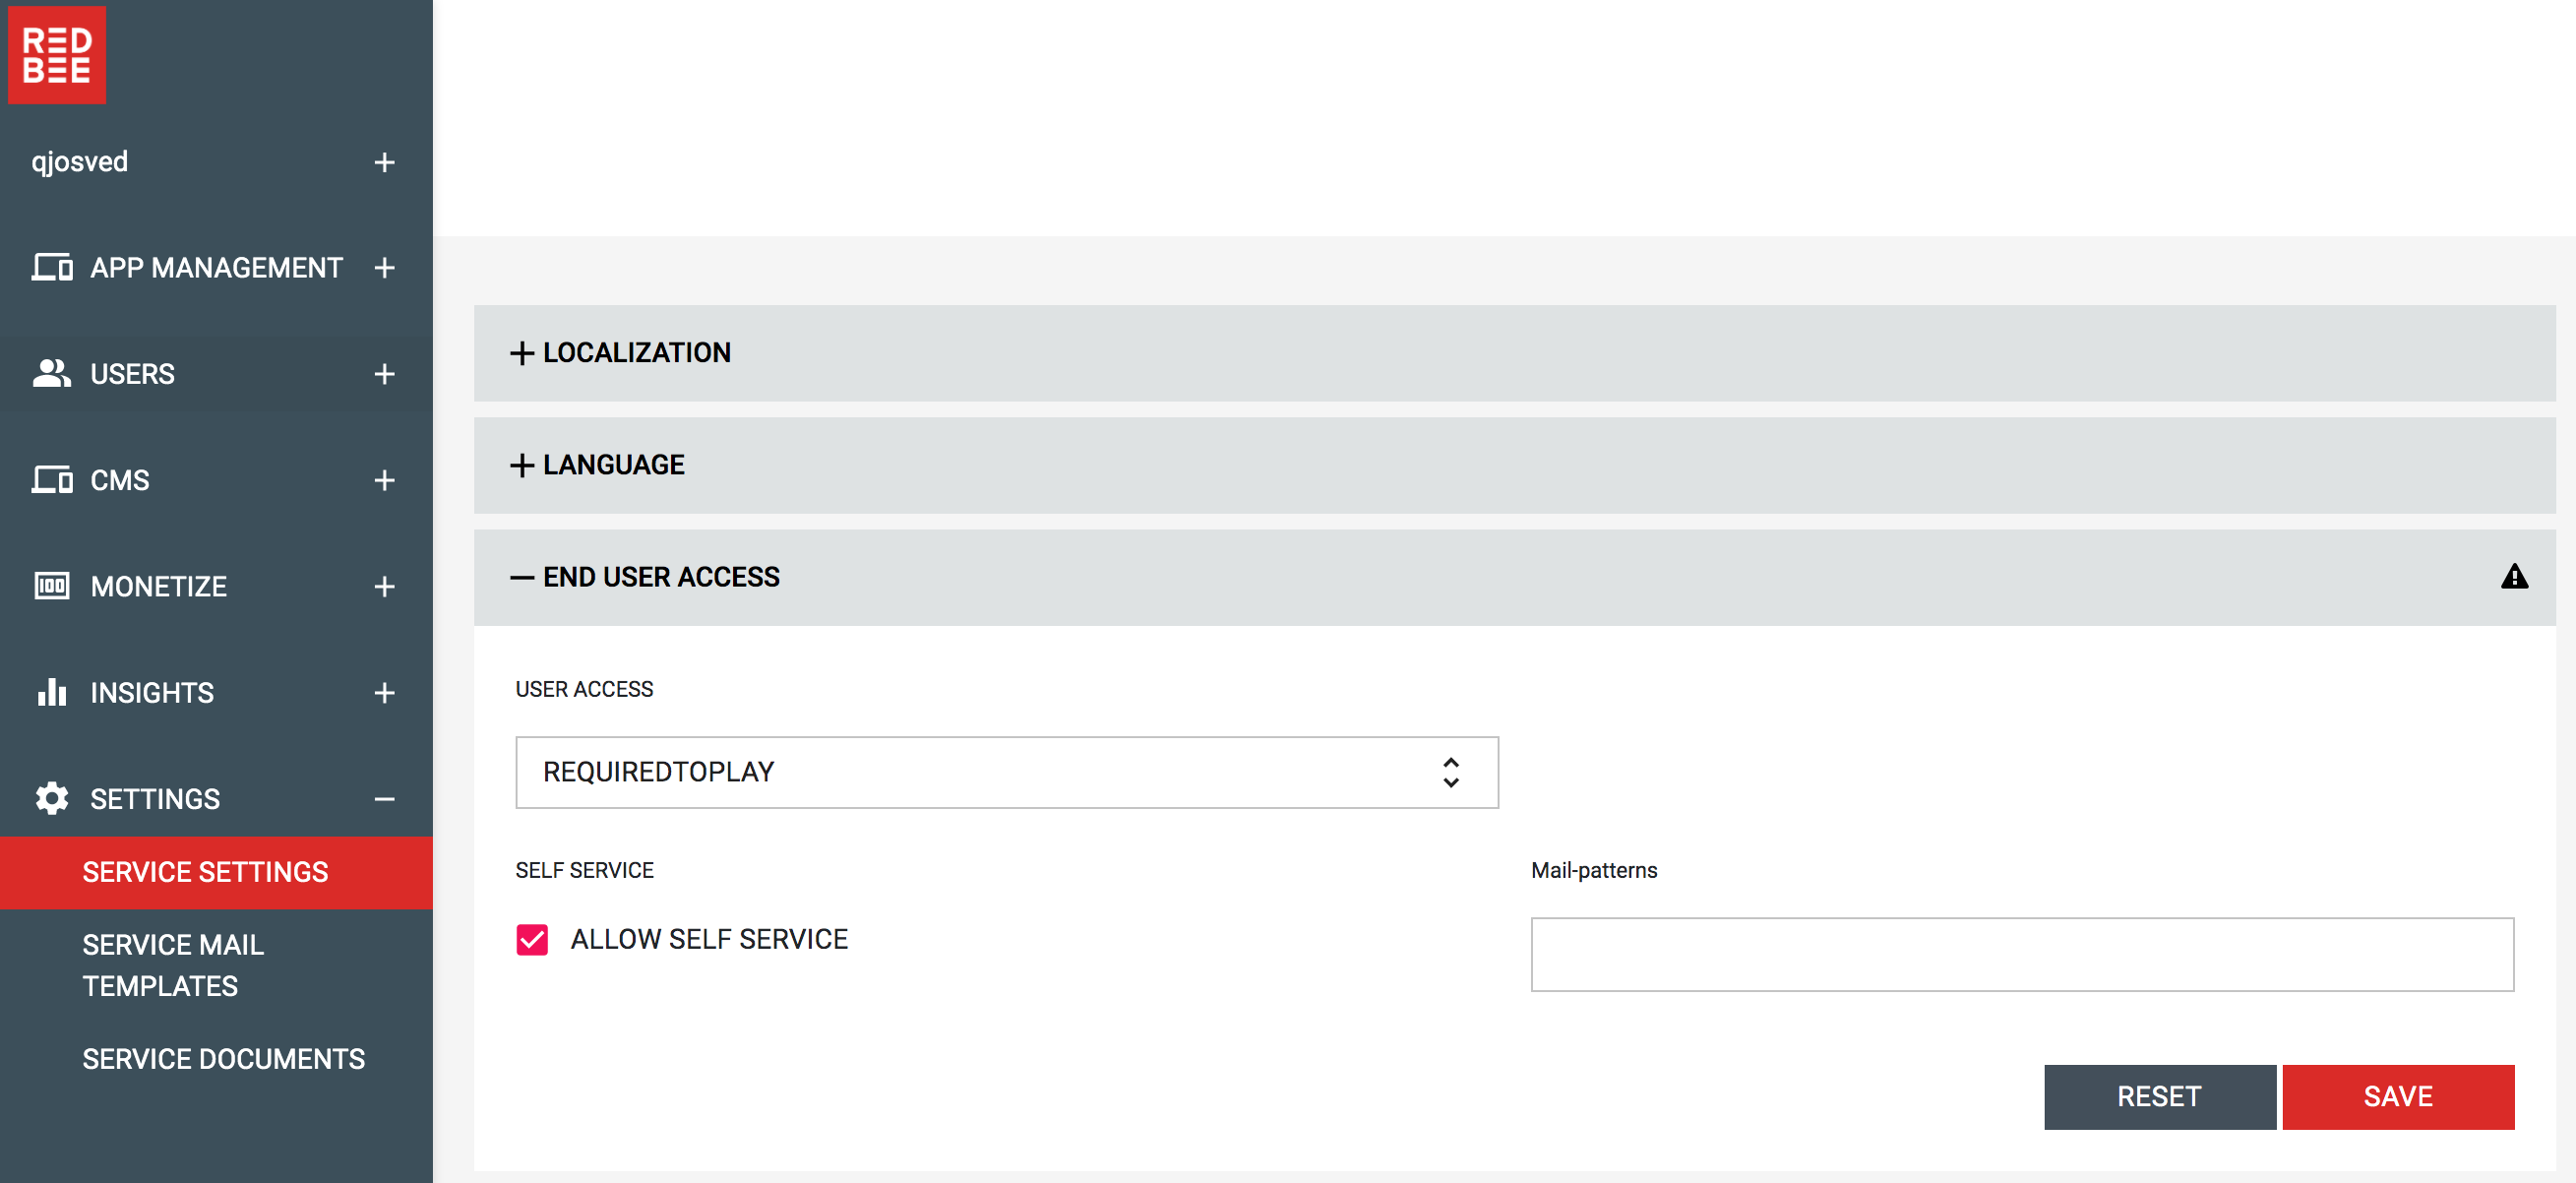 Customer Portal End User Access - Login Required To Play